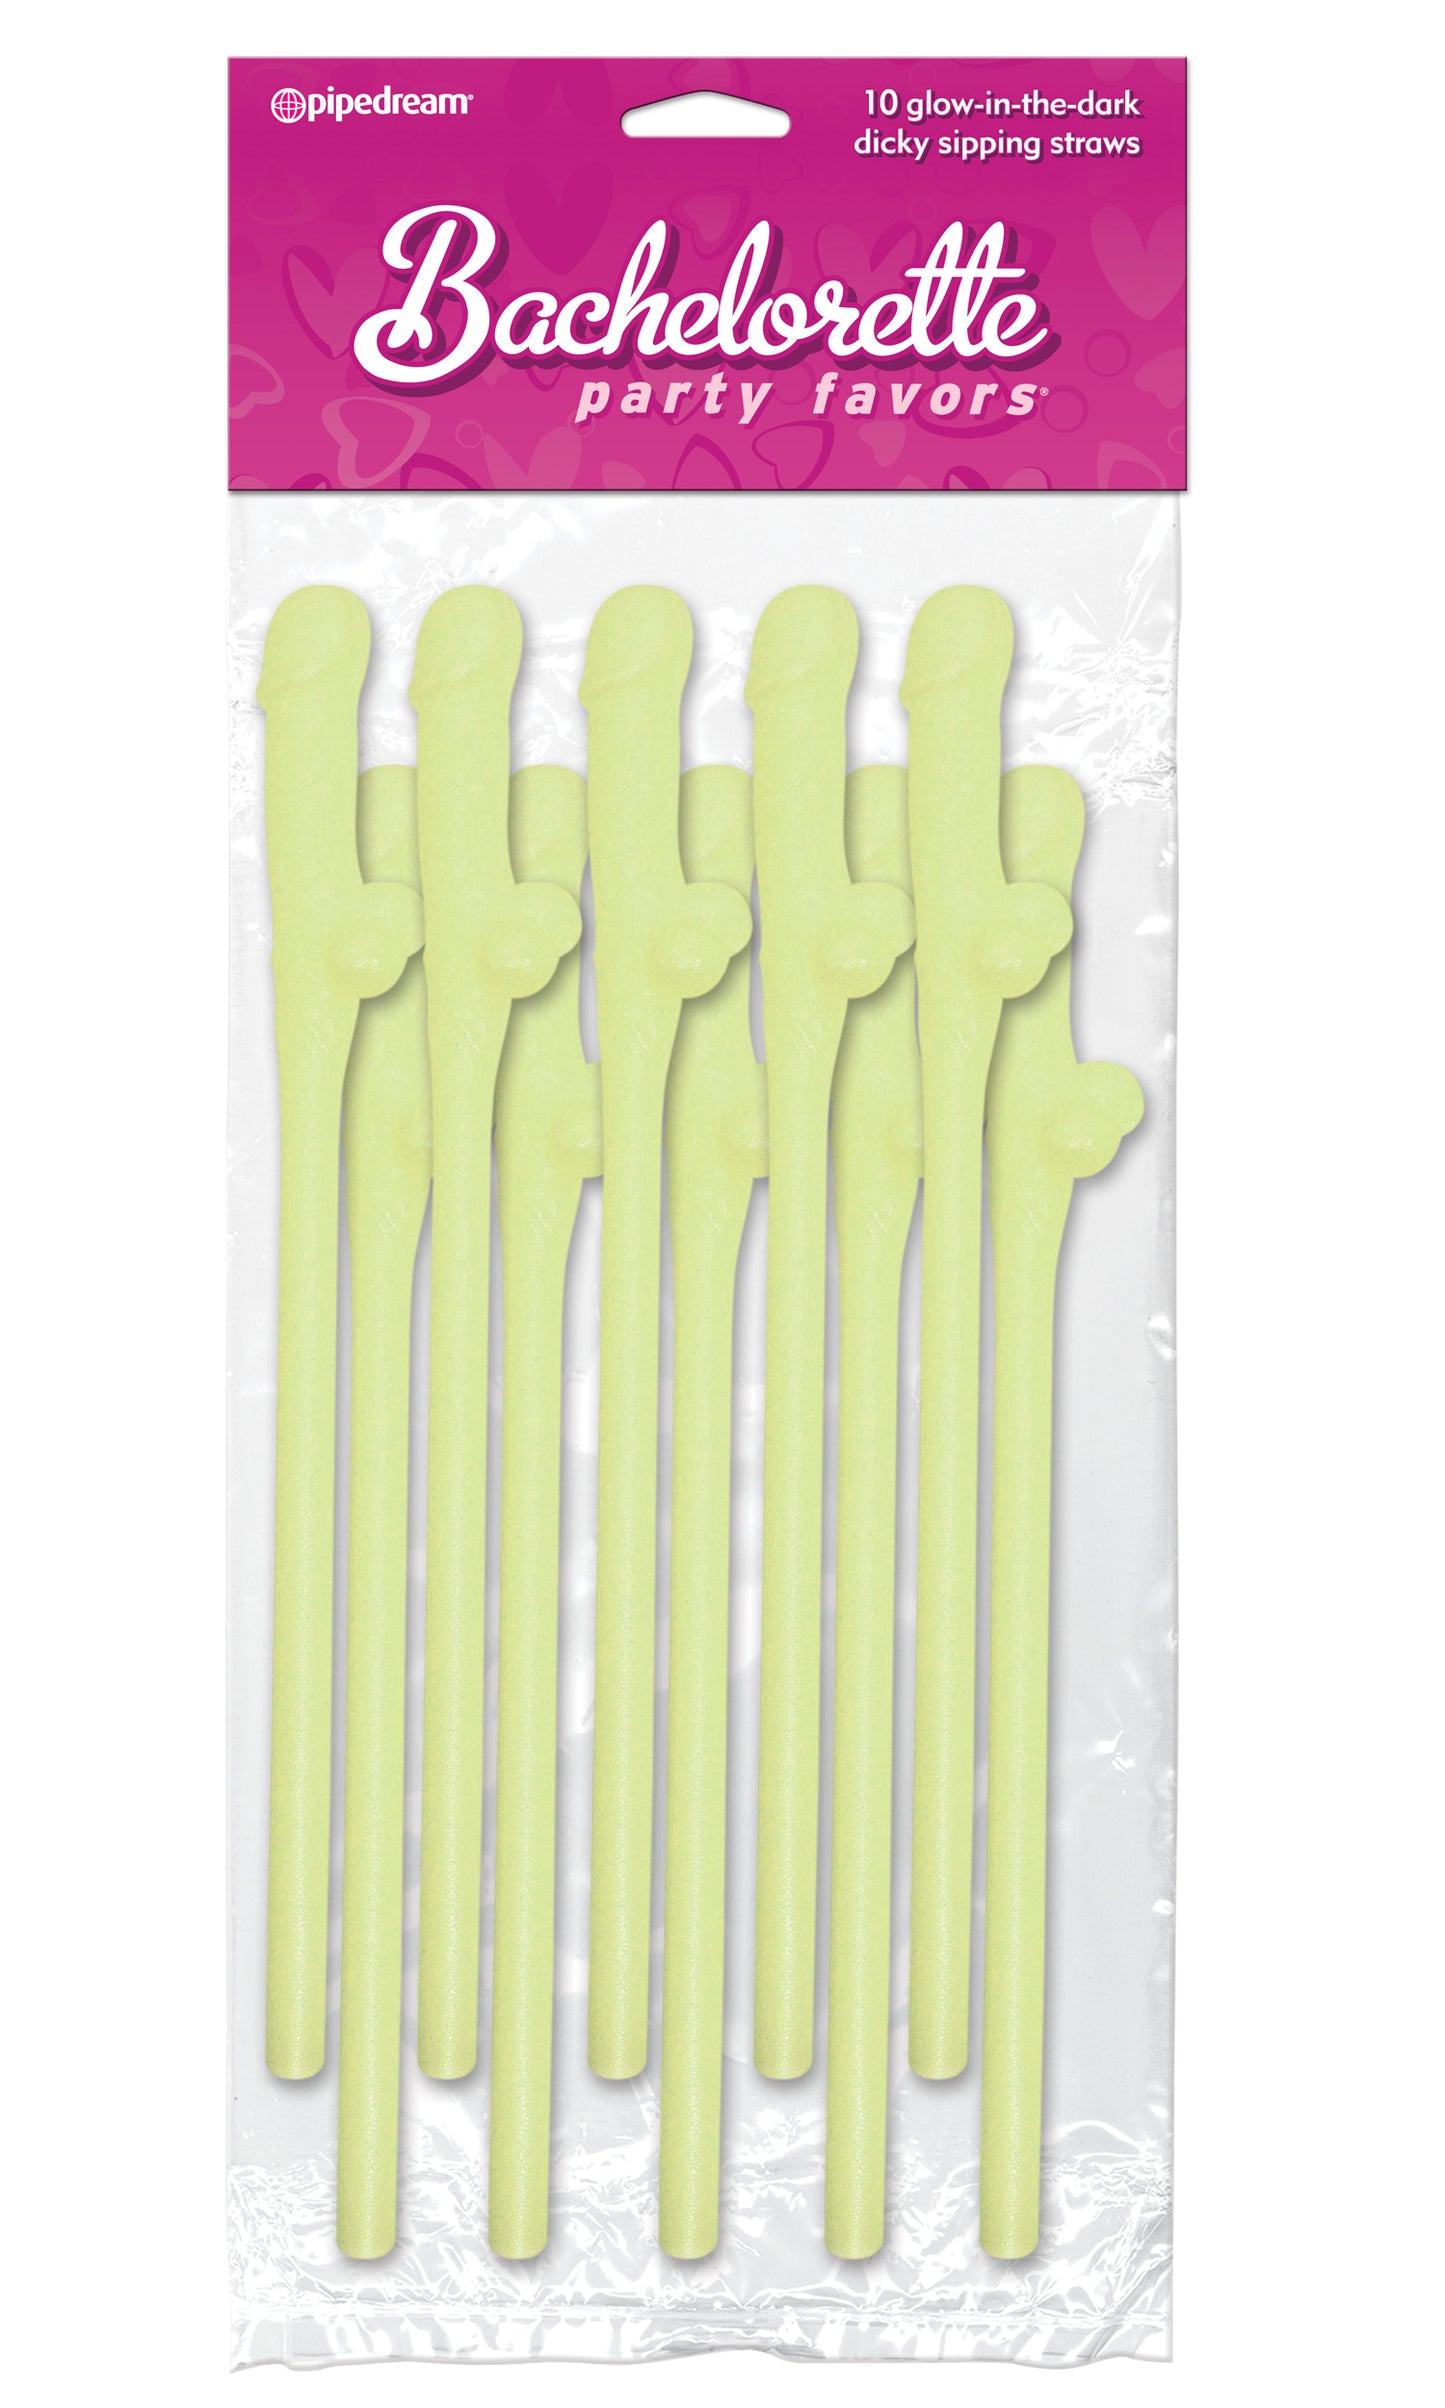 Bachelorette Party Favors Dicky Sipping Straws 10pk